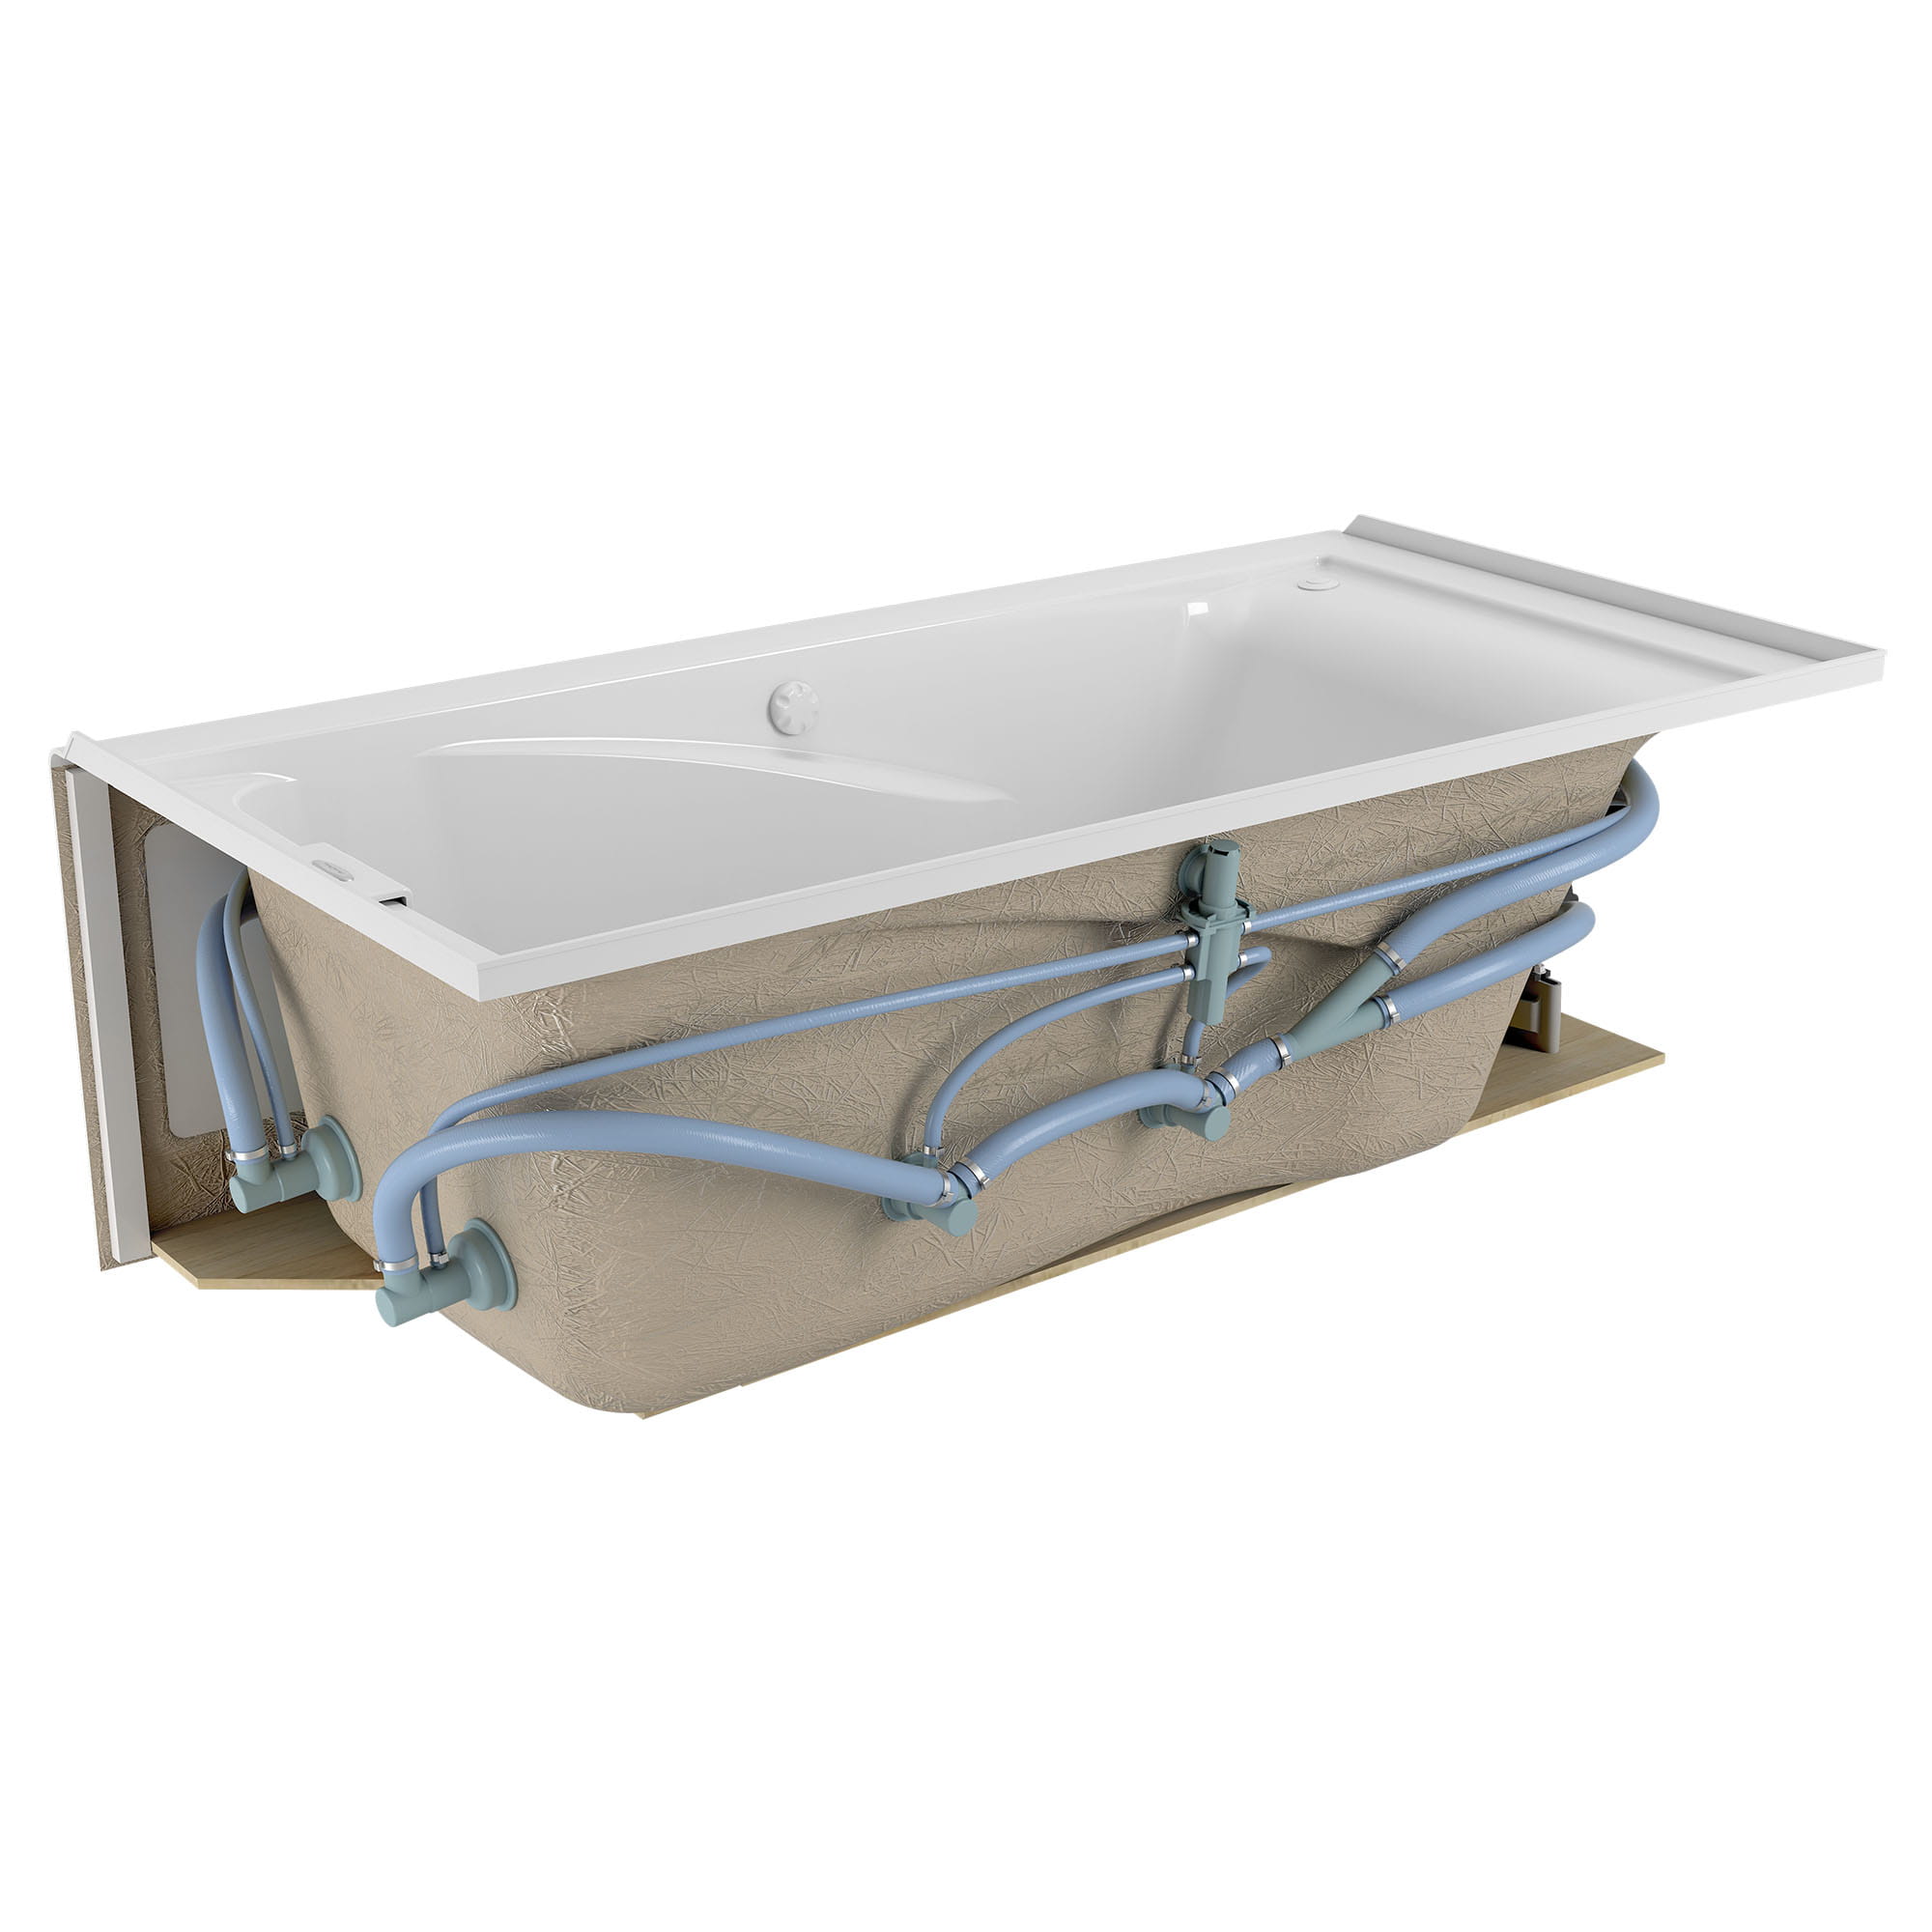 Mainstream 60in x 32in 8 Jet Whirlpool Tub with Left Hand Drain WHITE